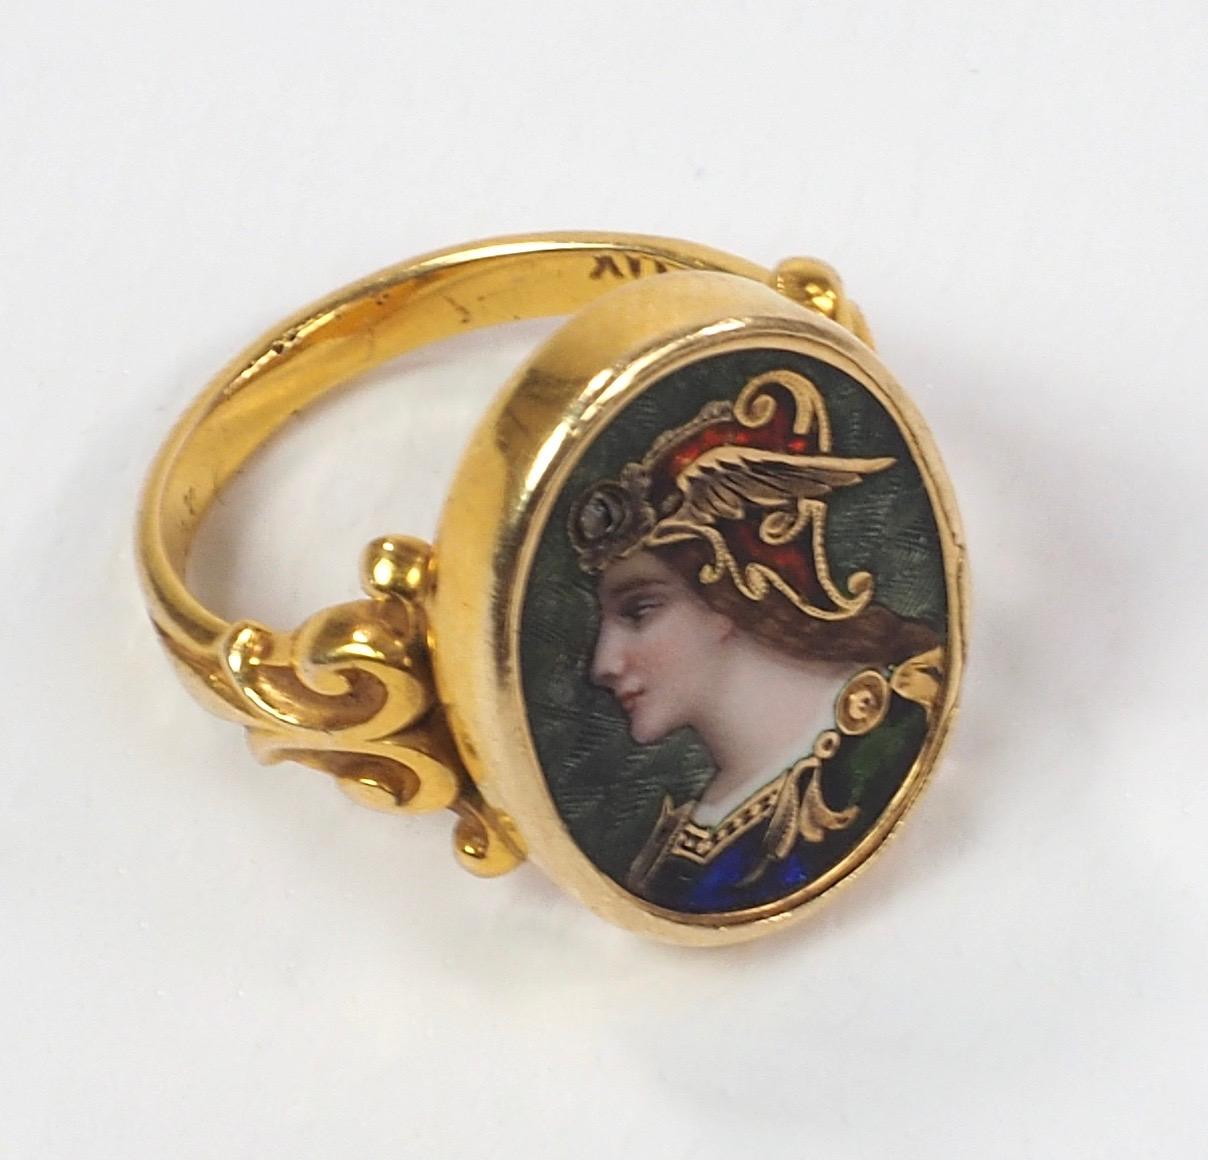 A Pre-Raphelite enamel and diamond ring depicting a Viking maiden, with a single rose-cut diamond accent to the winged headress,  finely enamelled with gold mount.
The Pre-Raphaelites formed one of the four great artistic movements between the